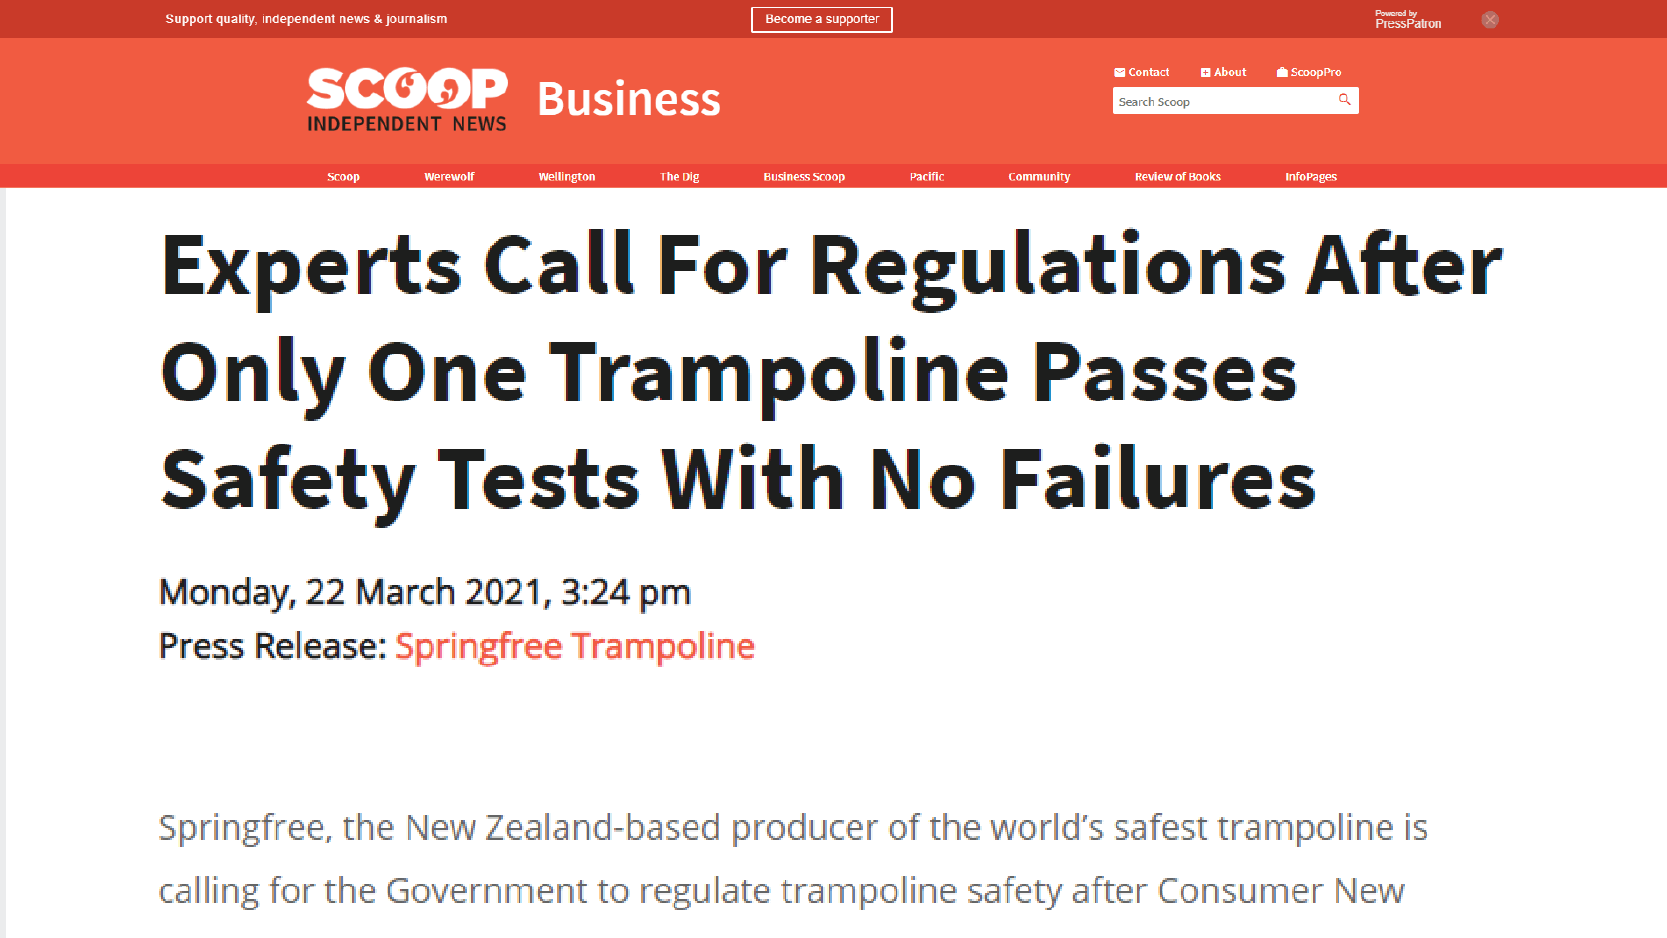 Experts Call For Regulations After Only One Trampoline Passes Safety Tests With No Failures